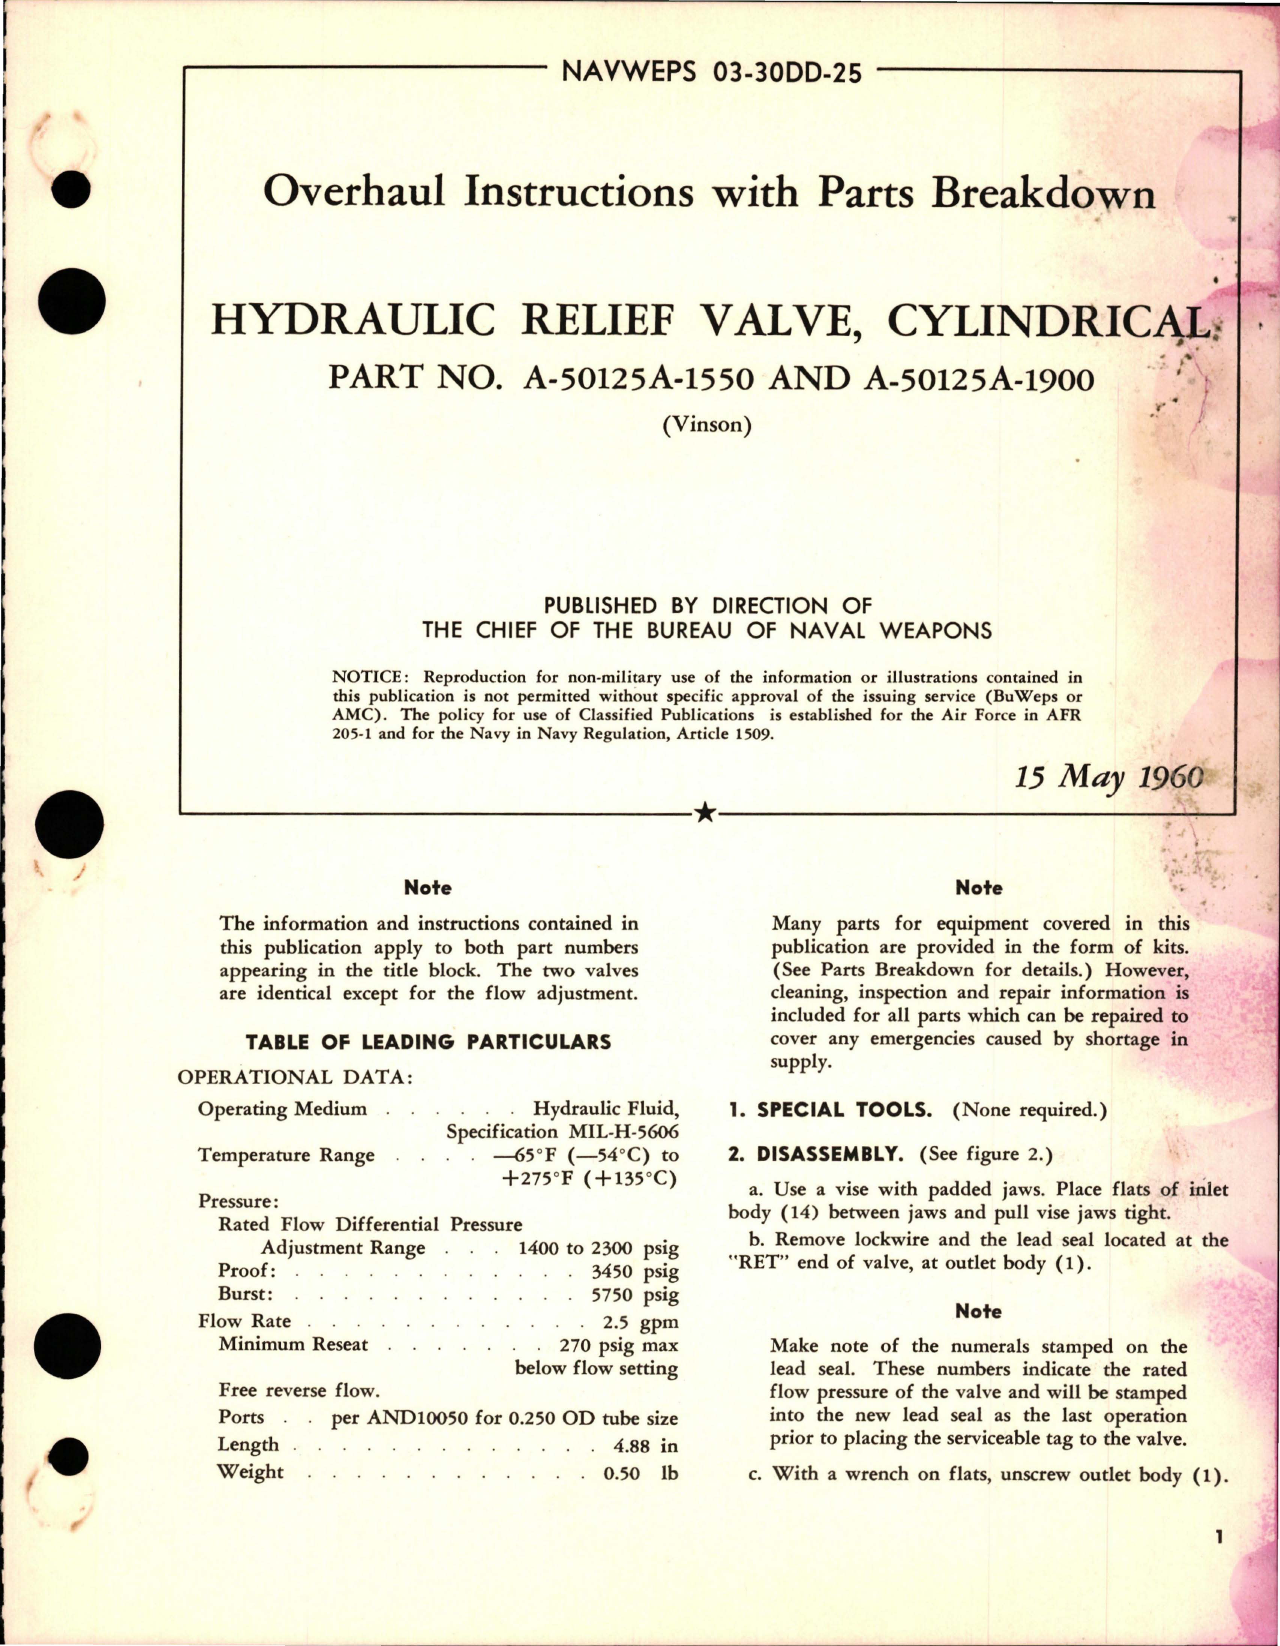 Sample page 1 from AirCorps Library document: Overhaul Instructions with Parts Breakdown for Cylindrical Hydraulic Relief Valve - Part A-50125A-1550 and A-50125A-1900